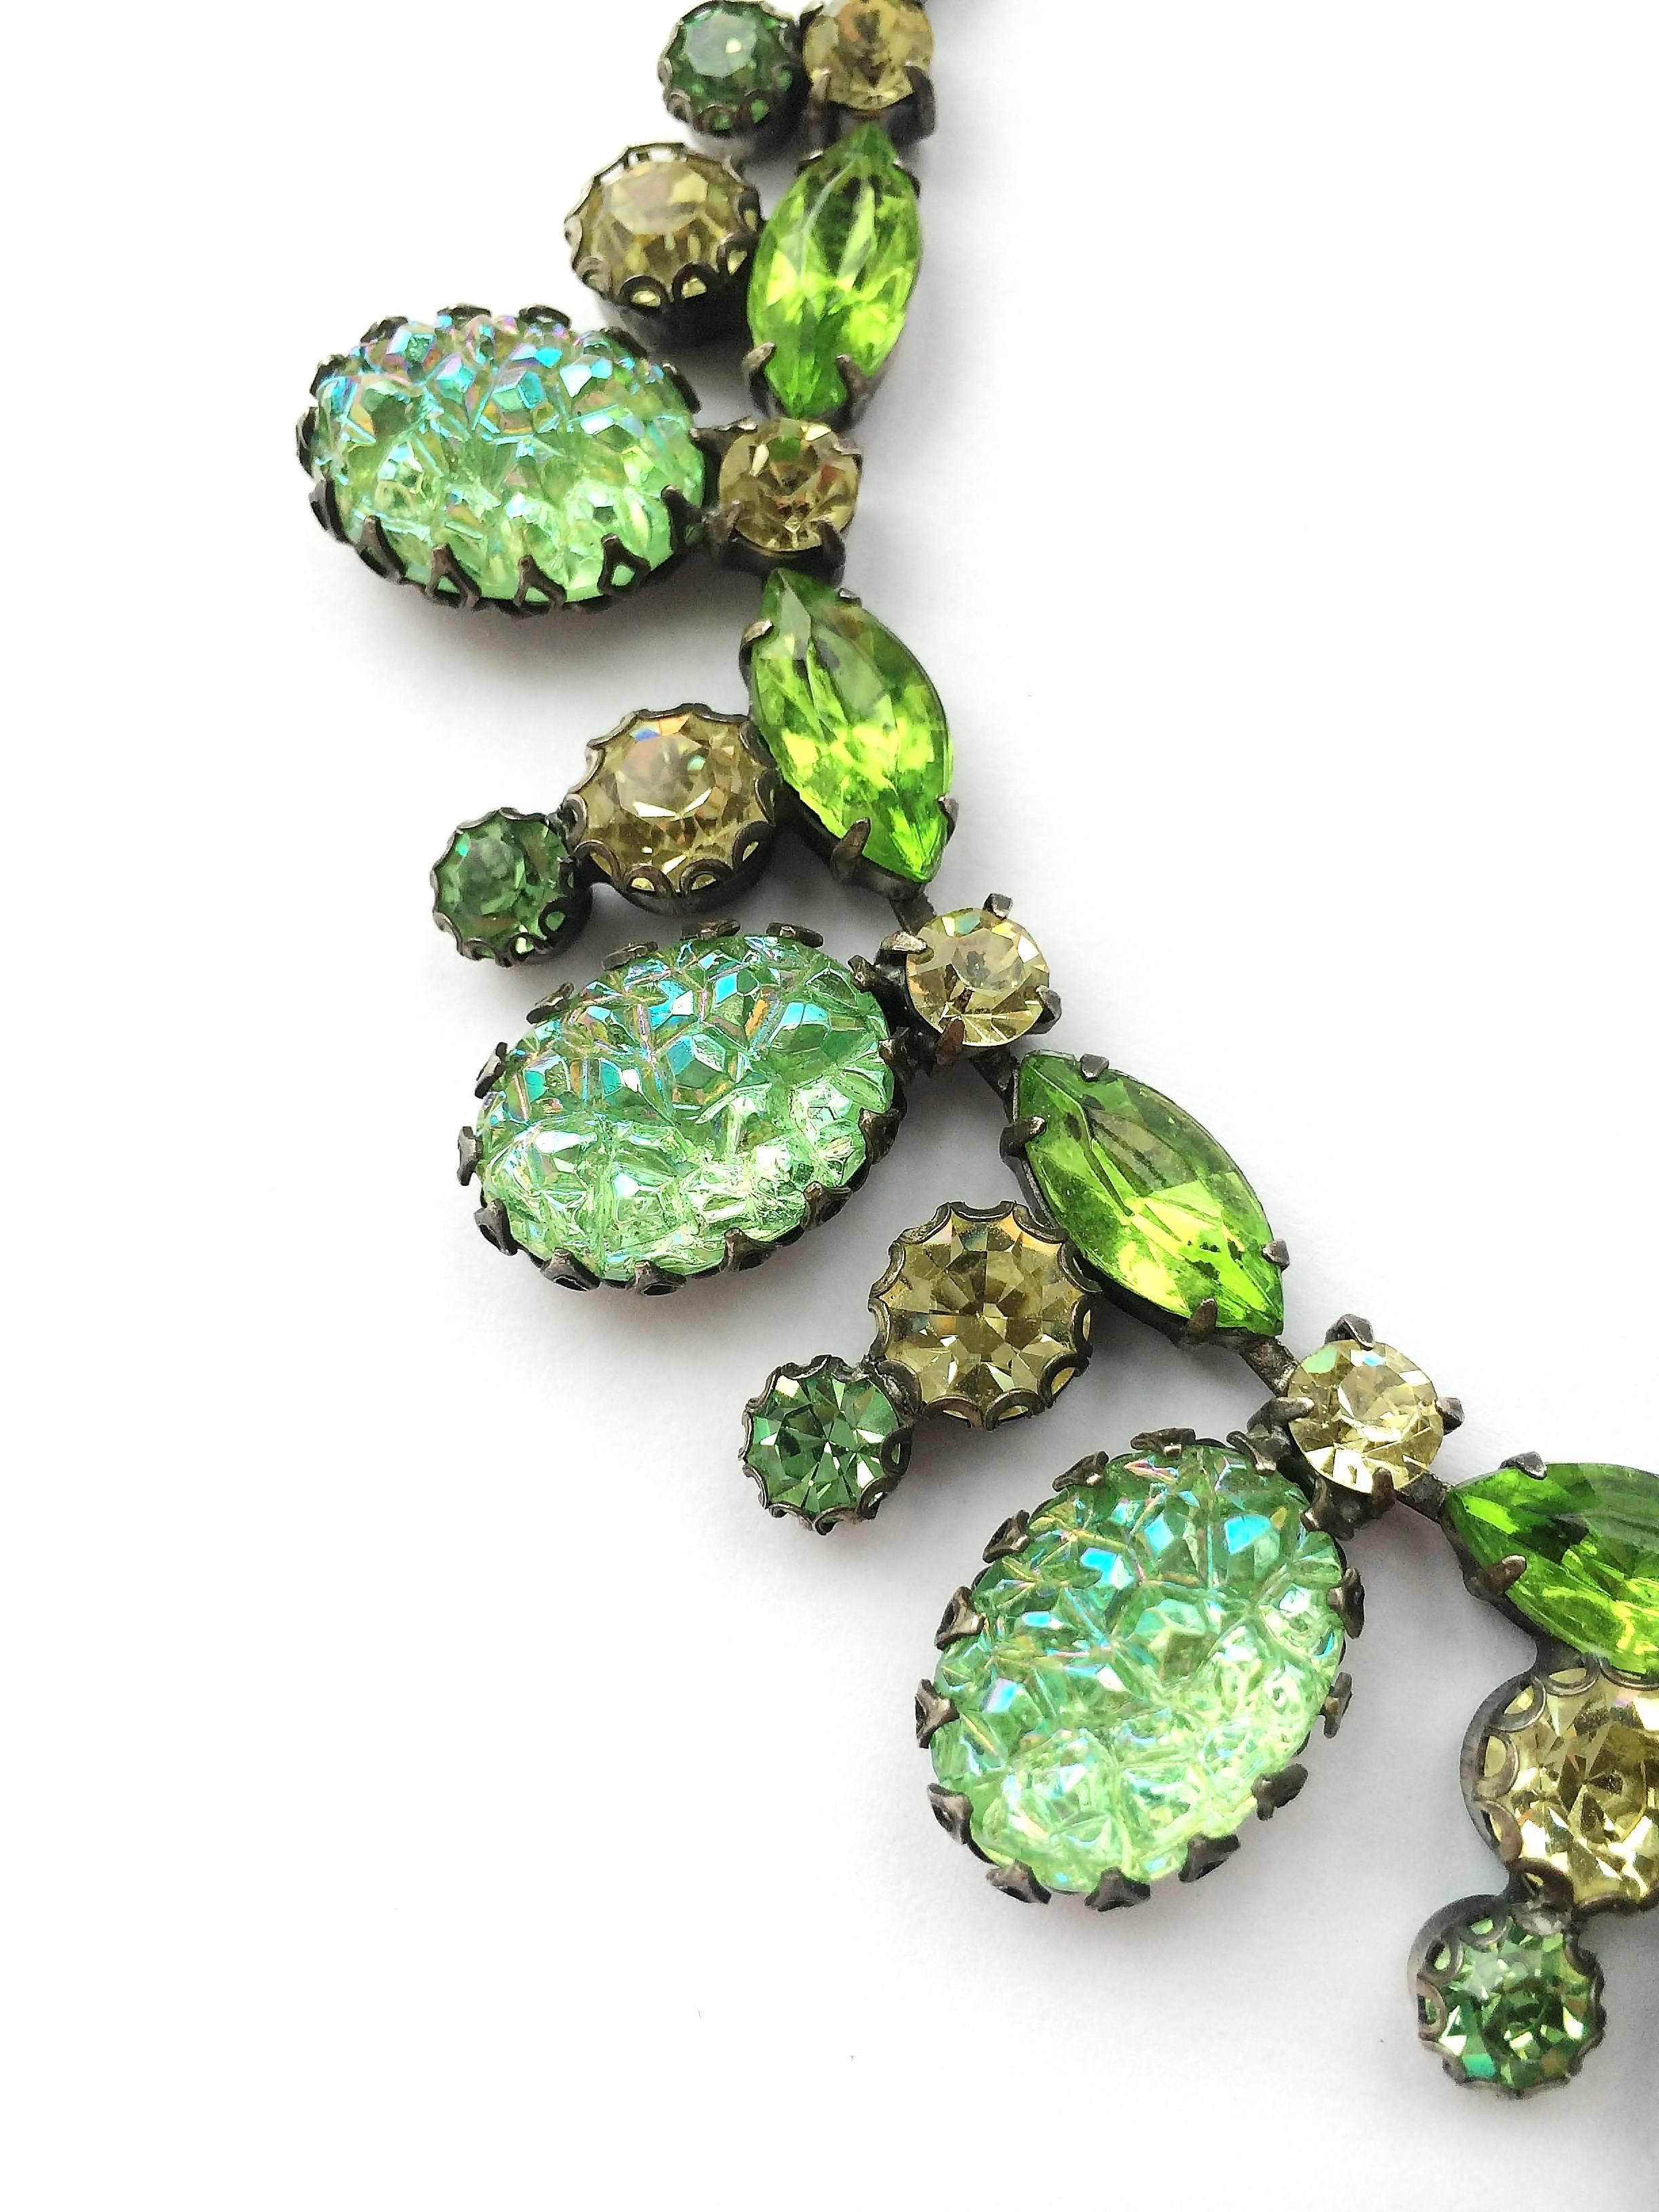 An elegant 3 piece parure from Schiaparelli in the 1950s, using her famous crumpled 'lava' stones in the suite, in a vivid and striking green,perfect for Spring or summer. Either worn as a whole or as an individual necklace, brooch or earring,this